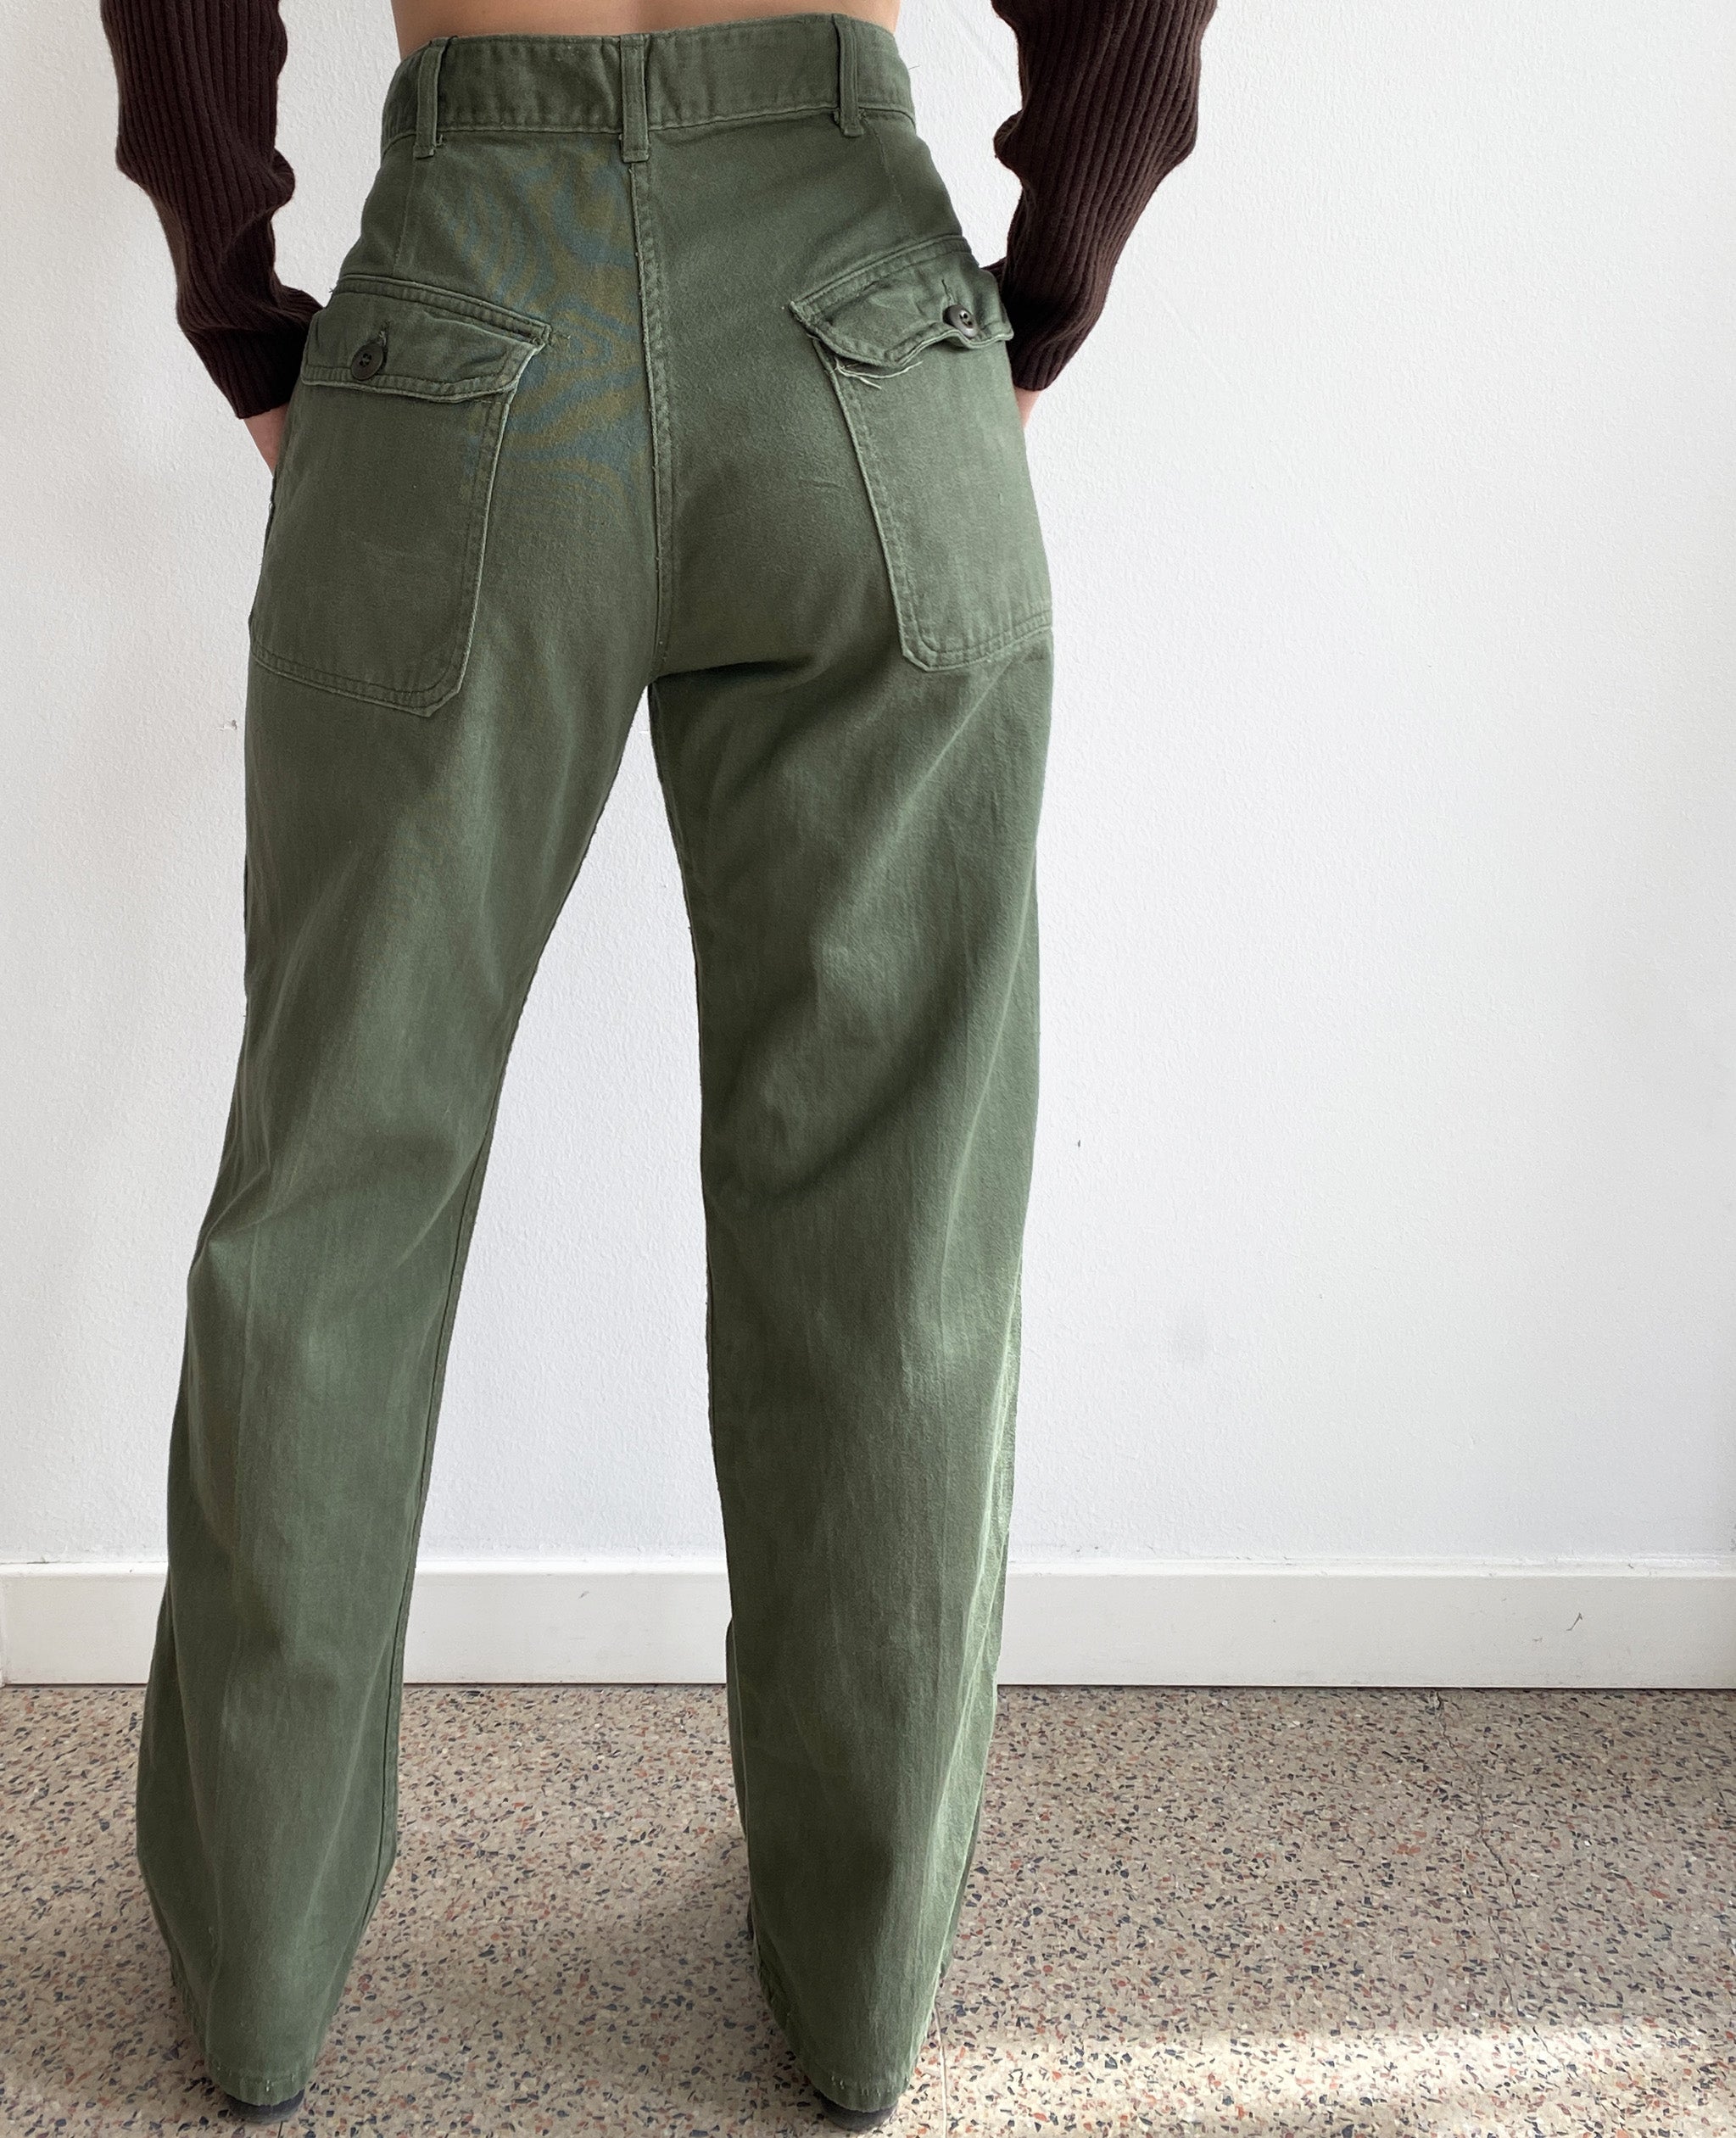 Solid Green Army Pant